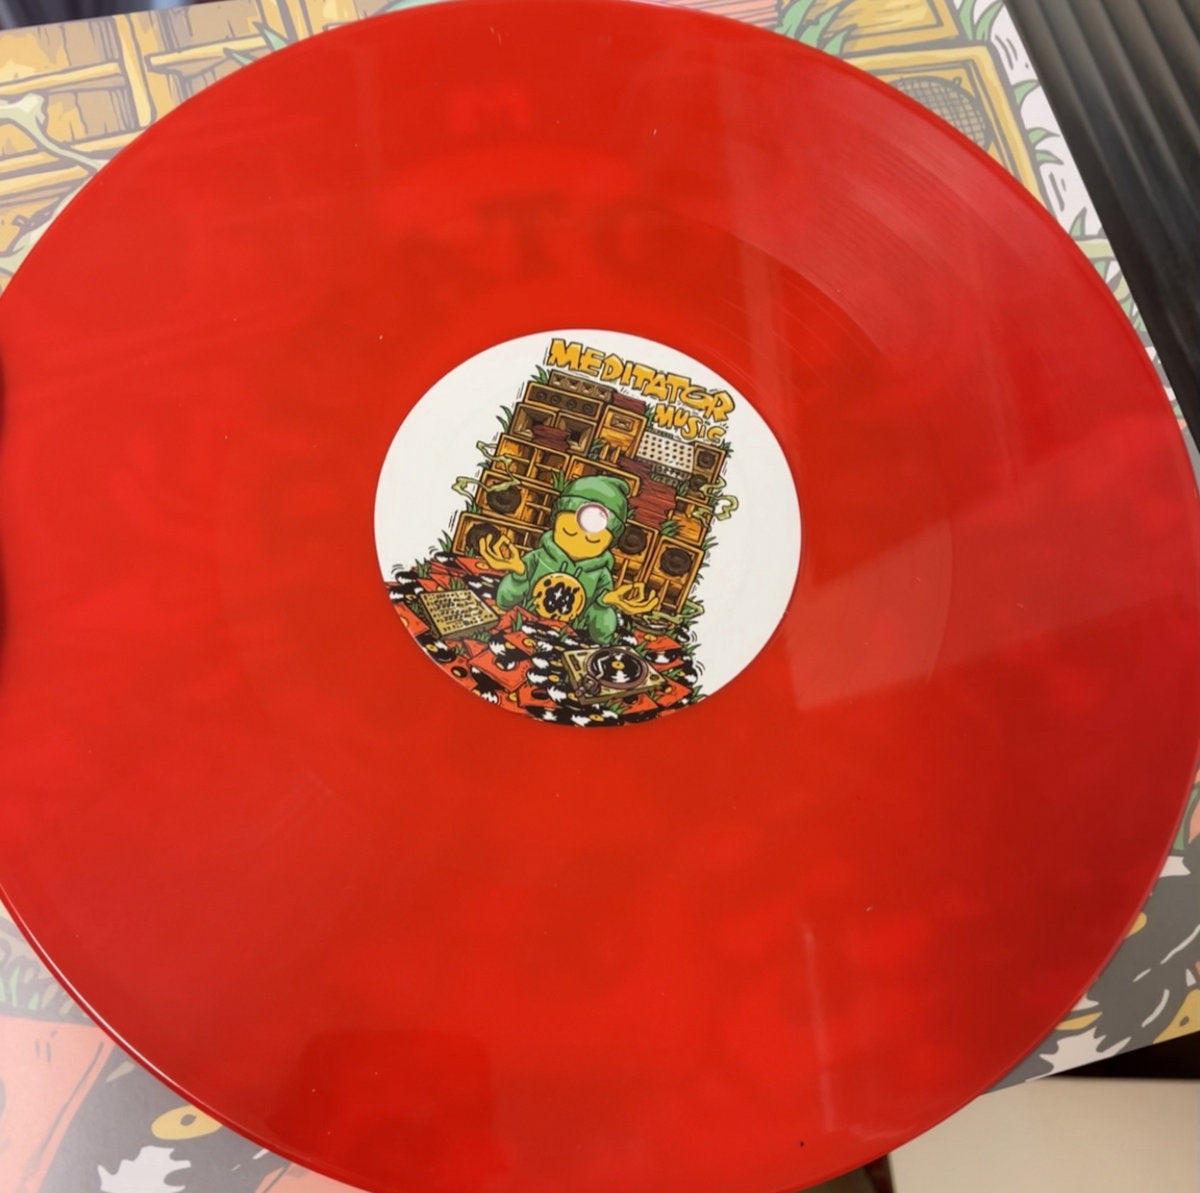 MARCUS VISIONARY 'ONLY DUB I NEED / IN THE END' 12" (RED VINYL)